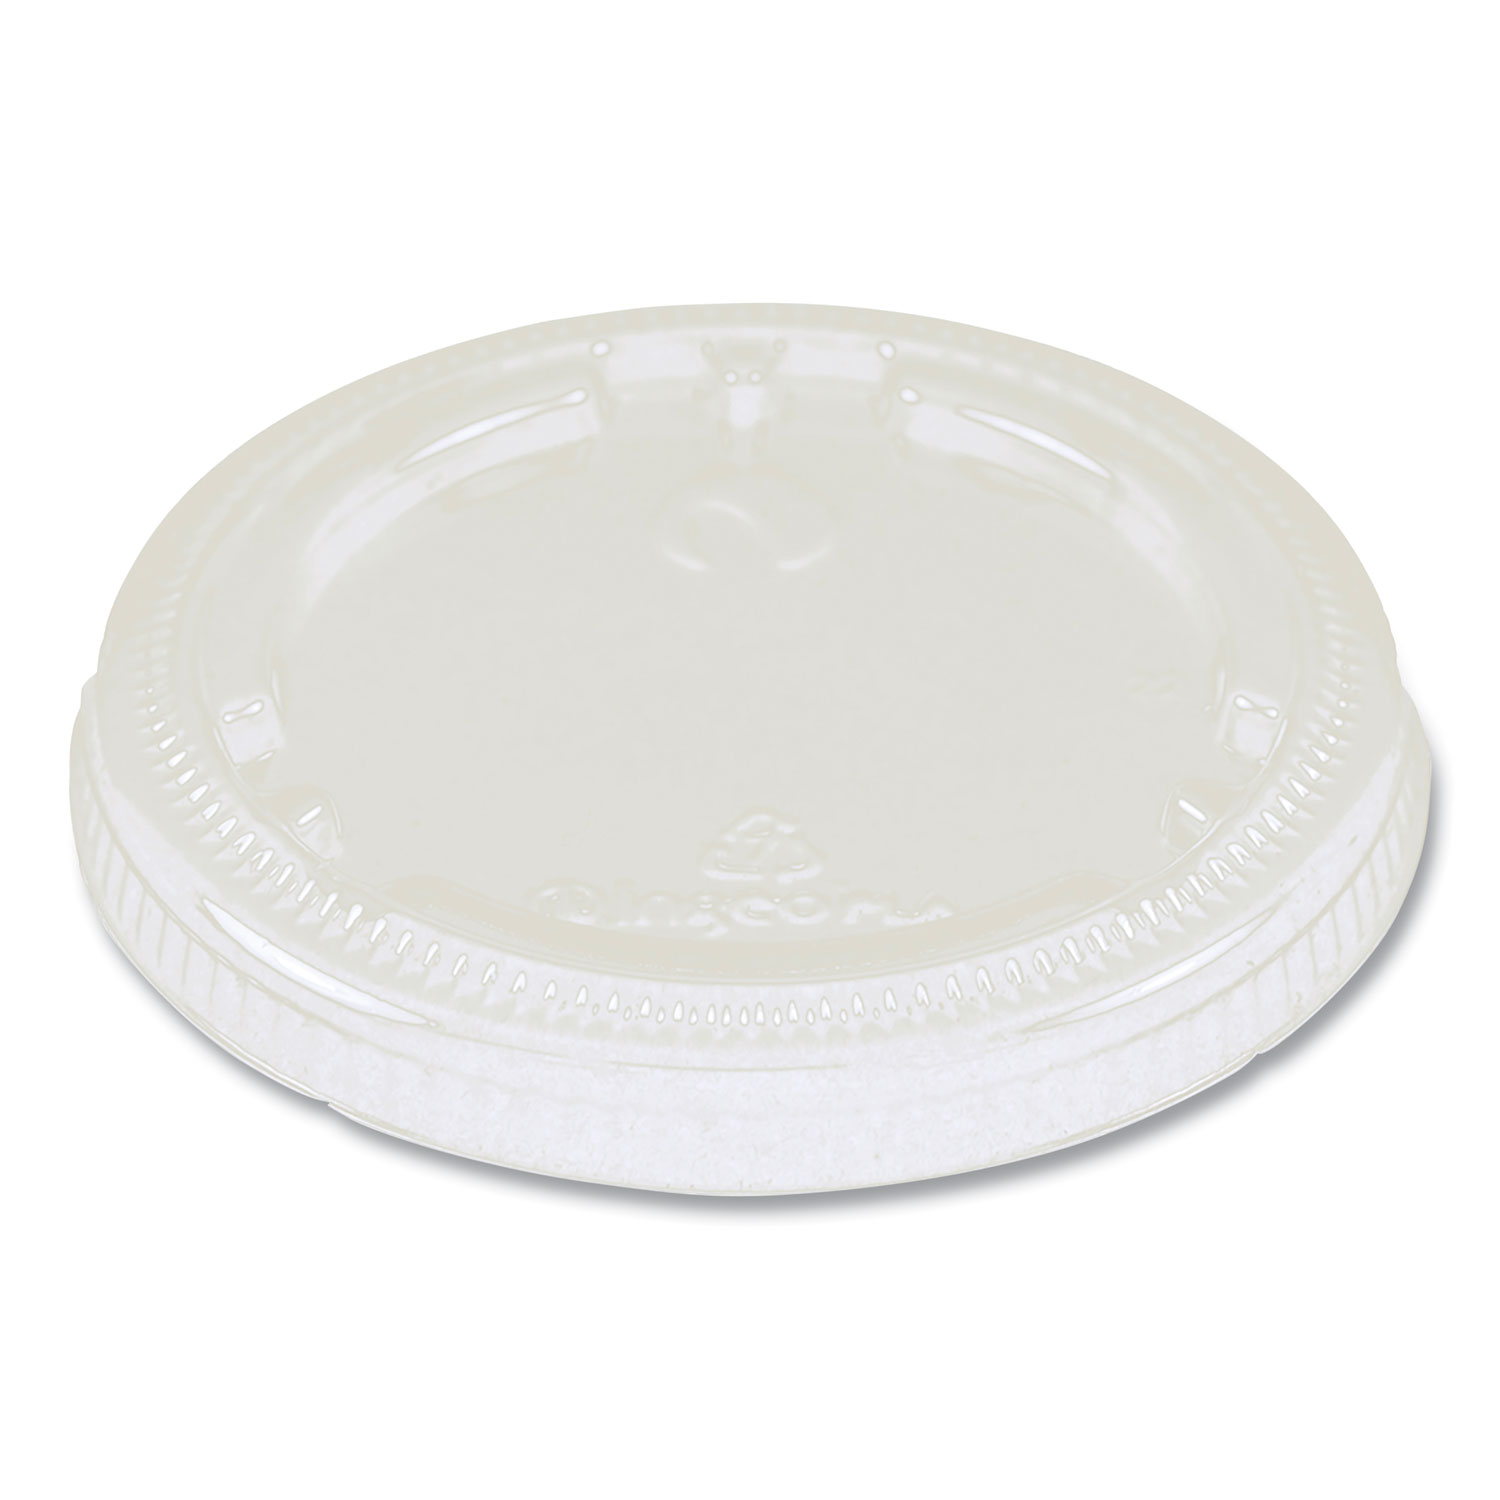  World Centric CPLCS9F Fiber Cup Lids, 3.1 Diameter x 0.4, Clear, 1,000/Carton (WORCPLCS9F) 